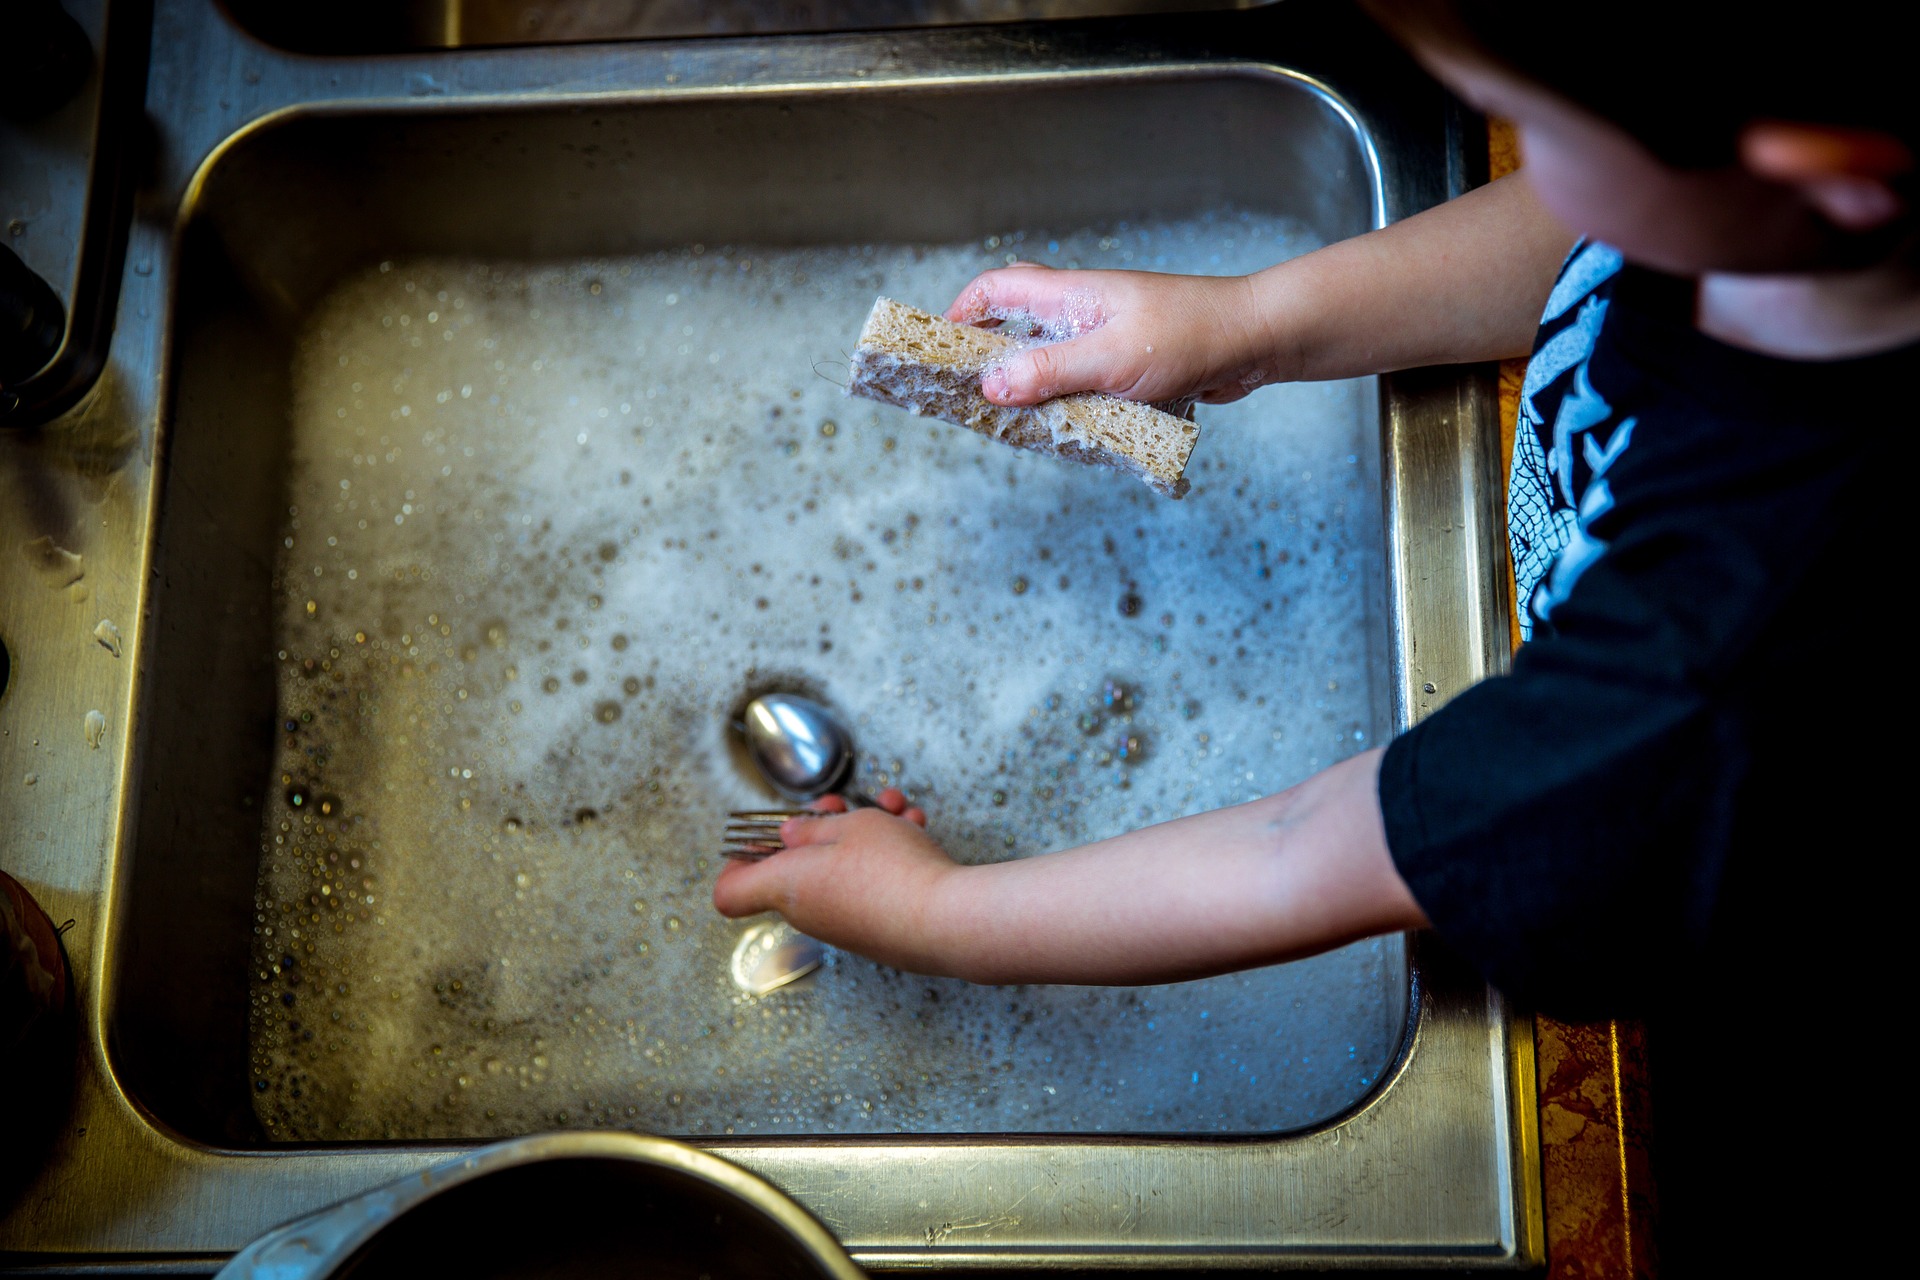 Child washing dishes in the sink